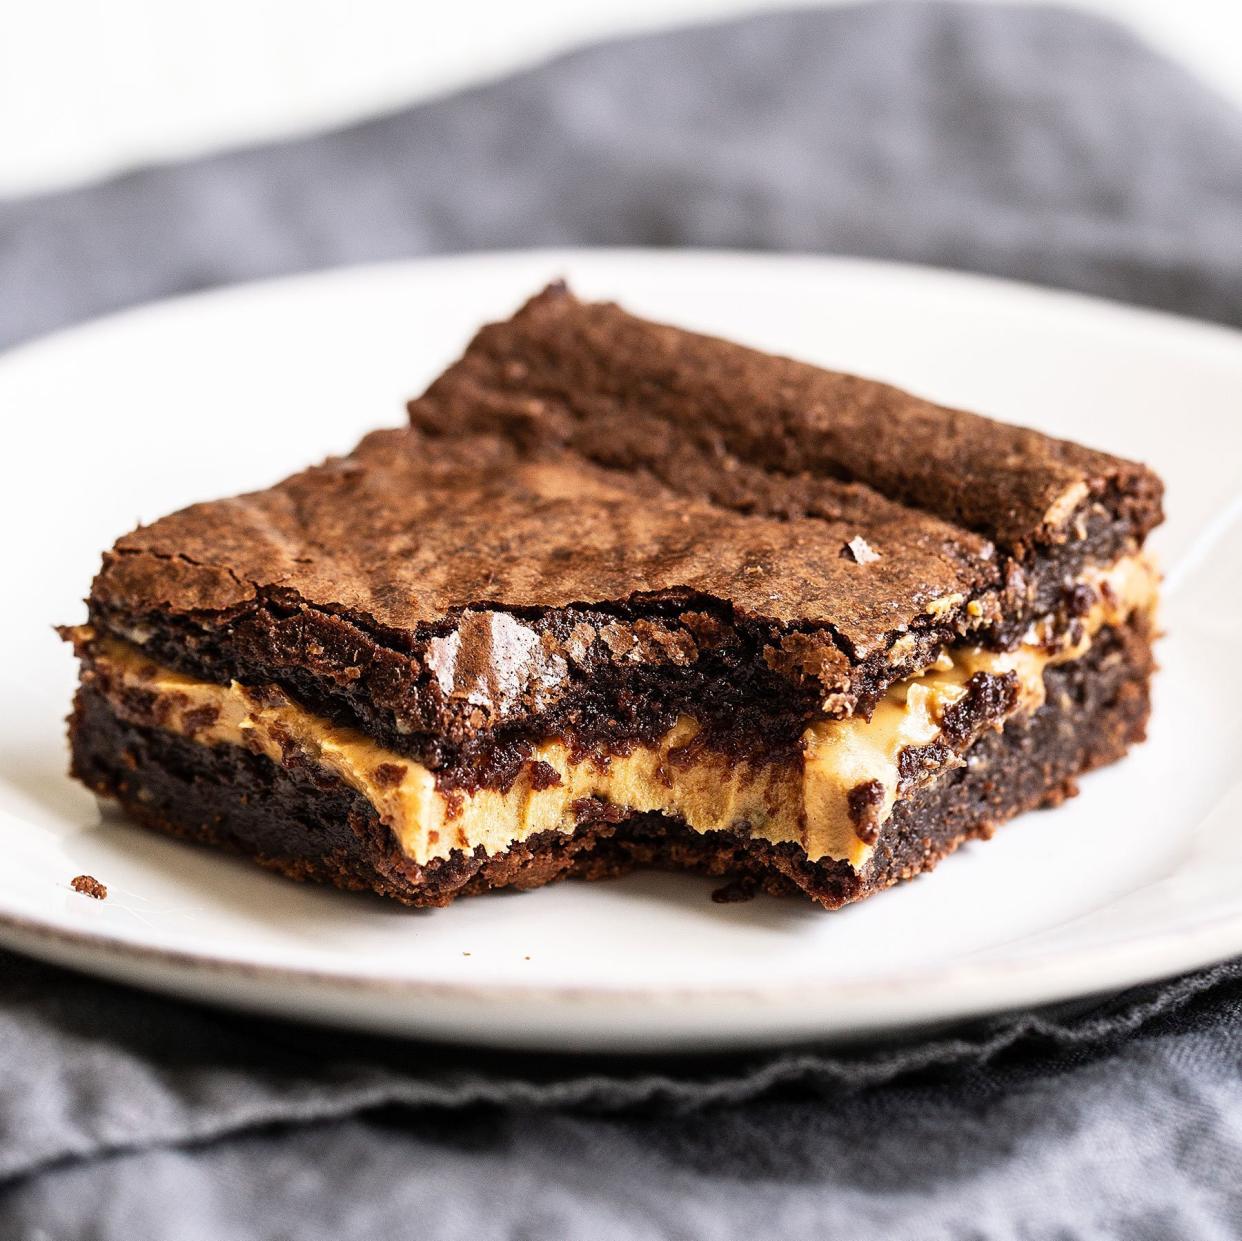 <strong><a href="https://www.handletheheat.com/peanut-butter-stuffed-brownies/" target="_blank" rel="noopener noreferrer">Get the Peanut Butter Stuffed Brownies recipe from Handle the Heat</a>  </strong>